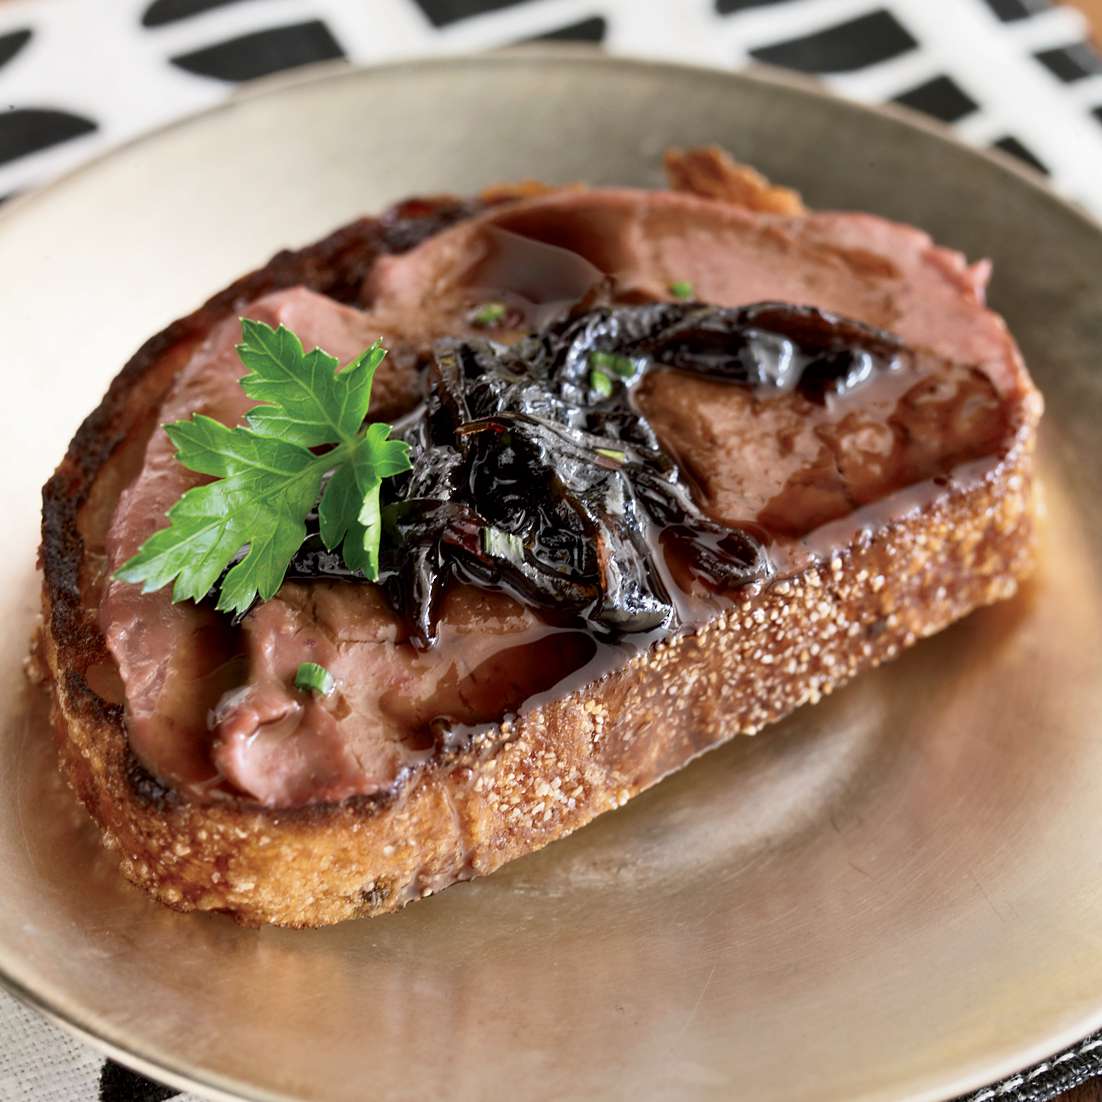 Chicken-Liver Toasts with Shallot Jam 